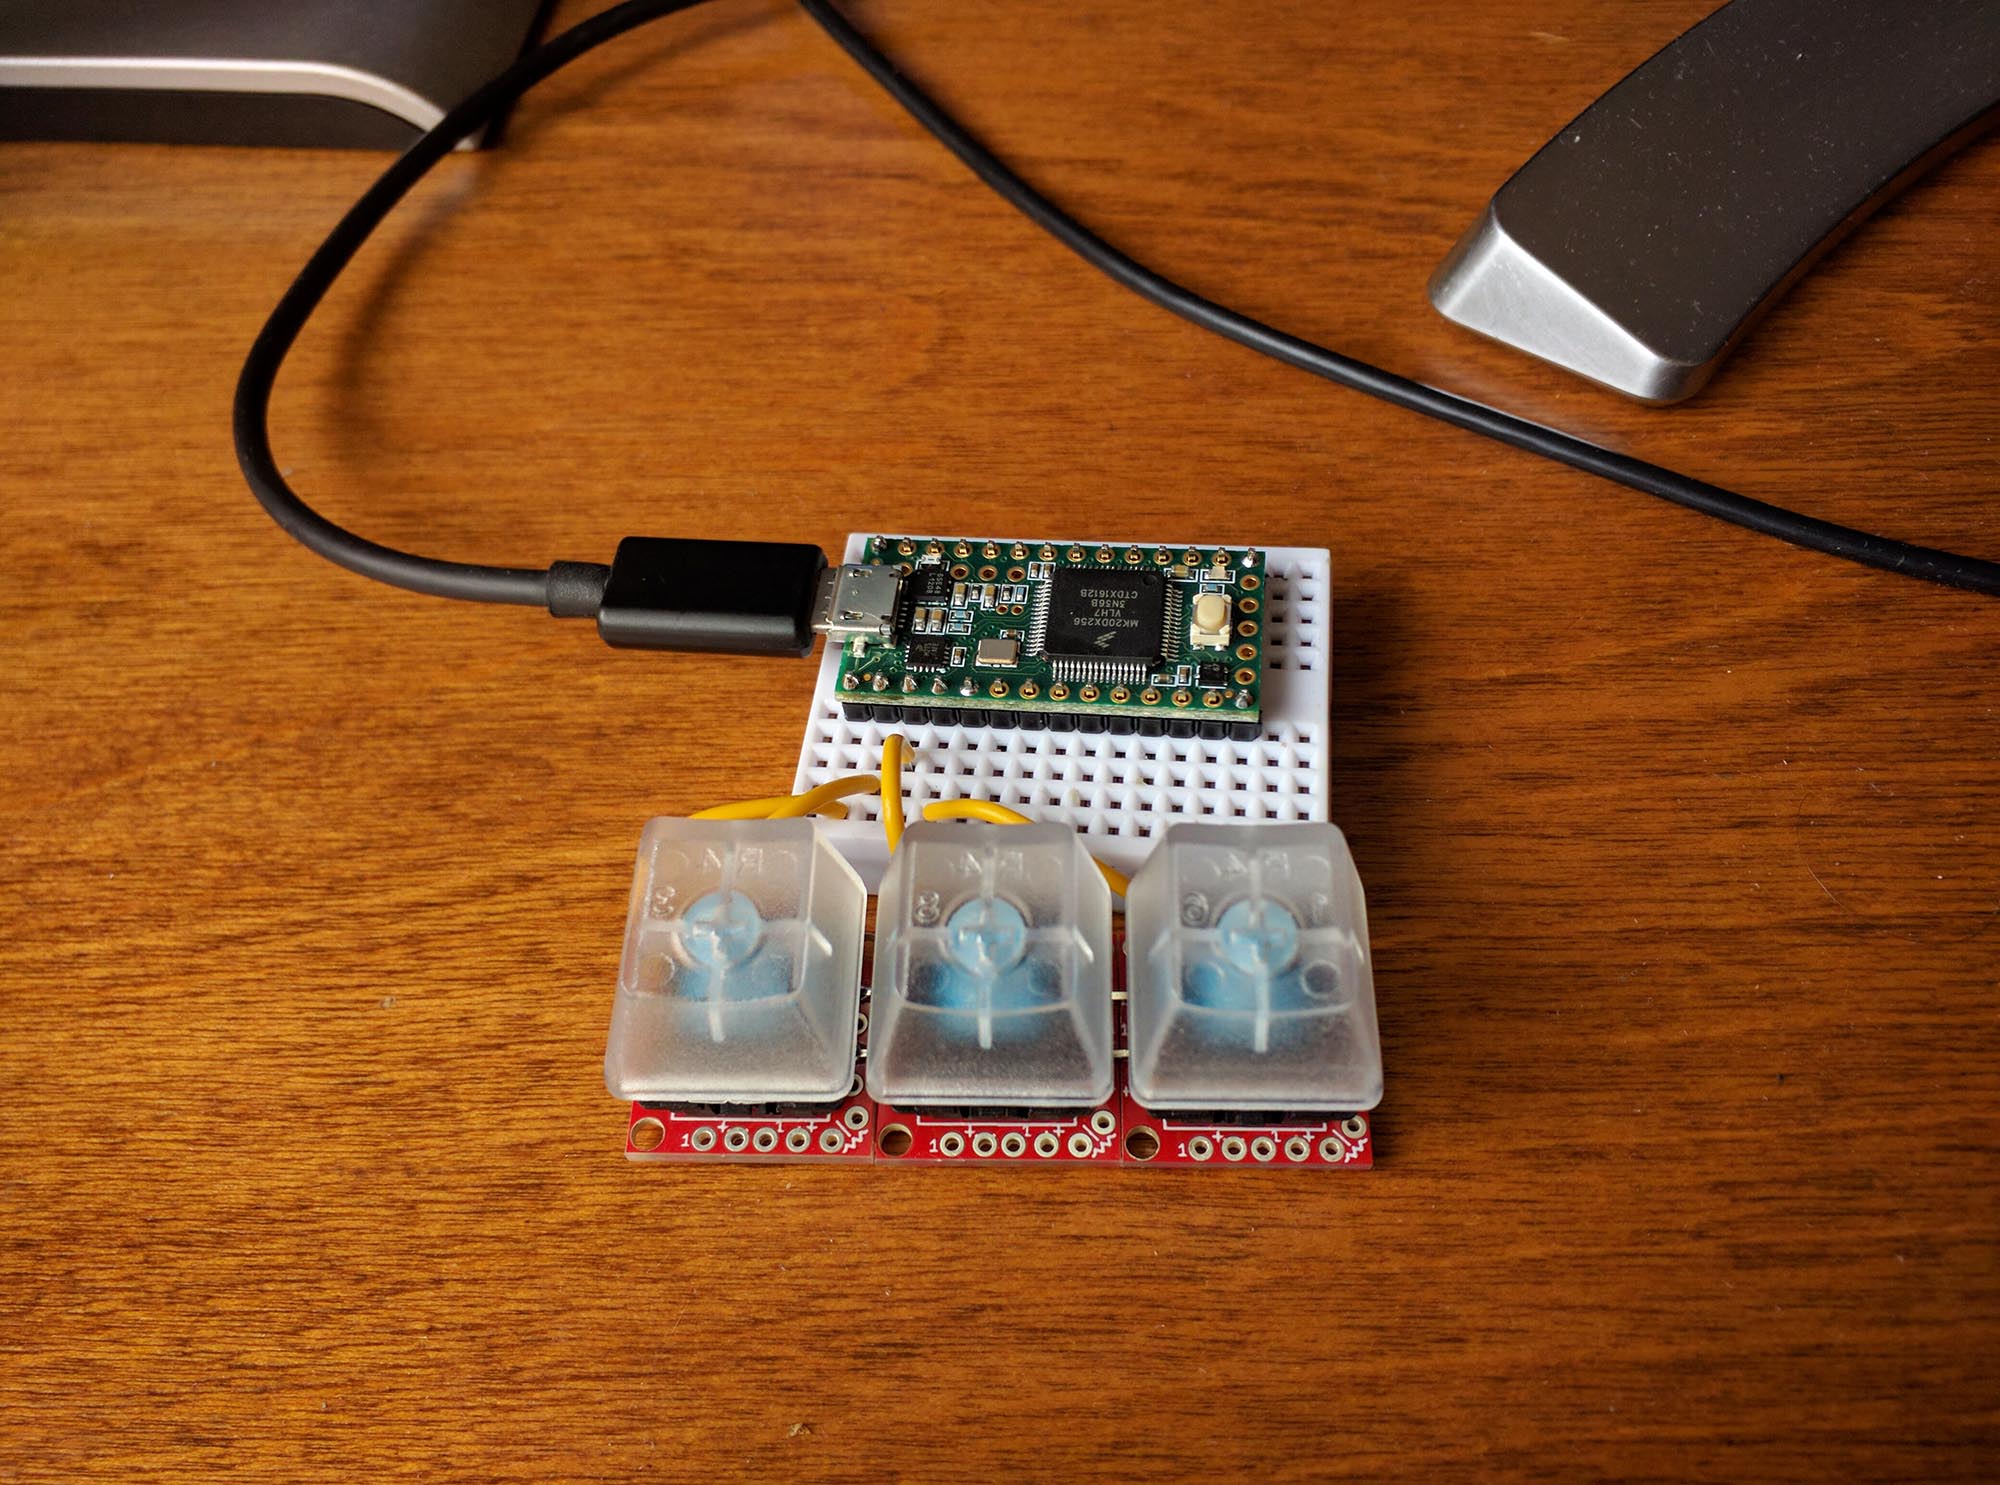 Microcontroller connected to 3 key switches for testing